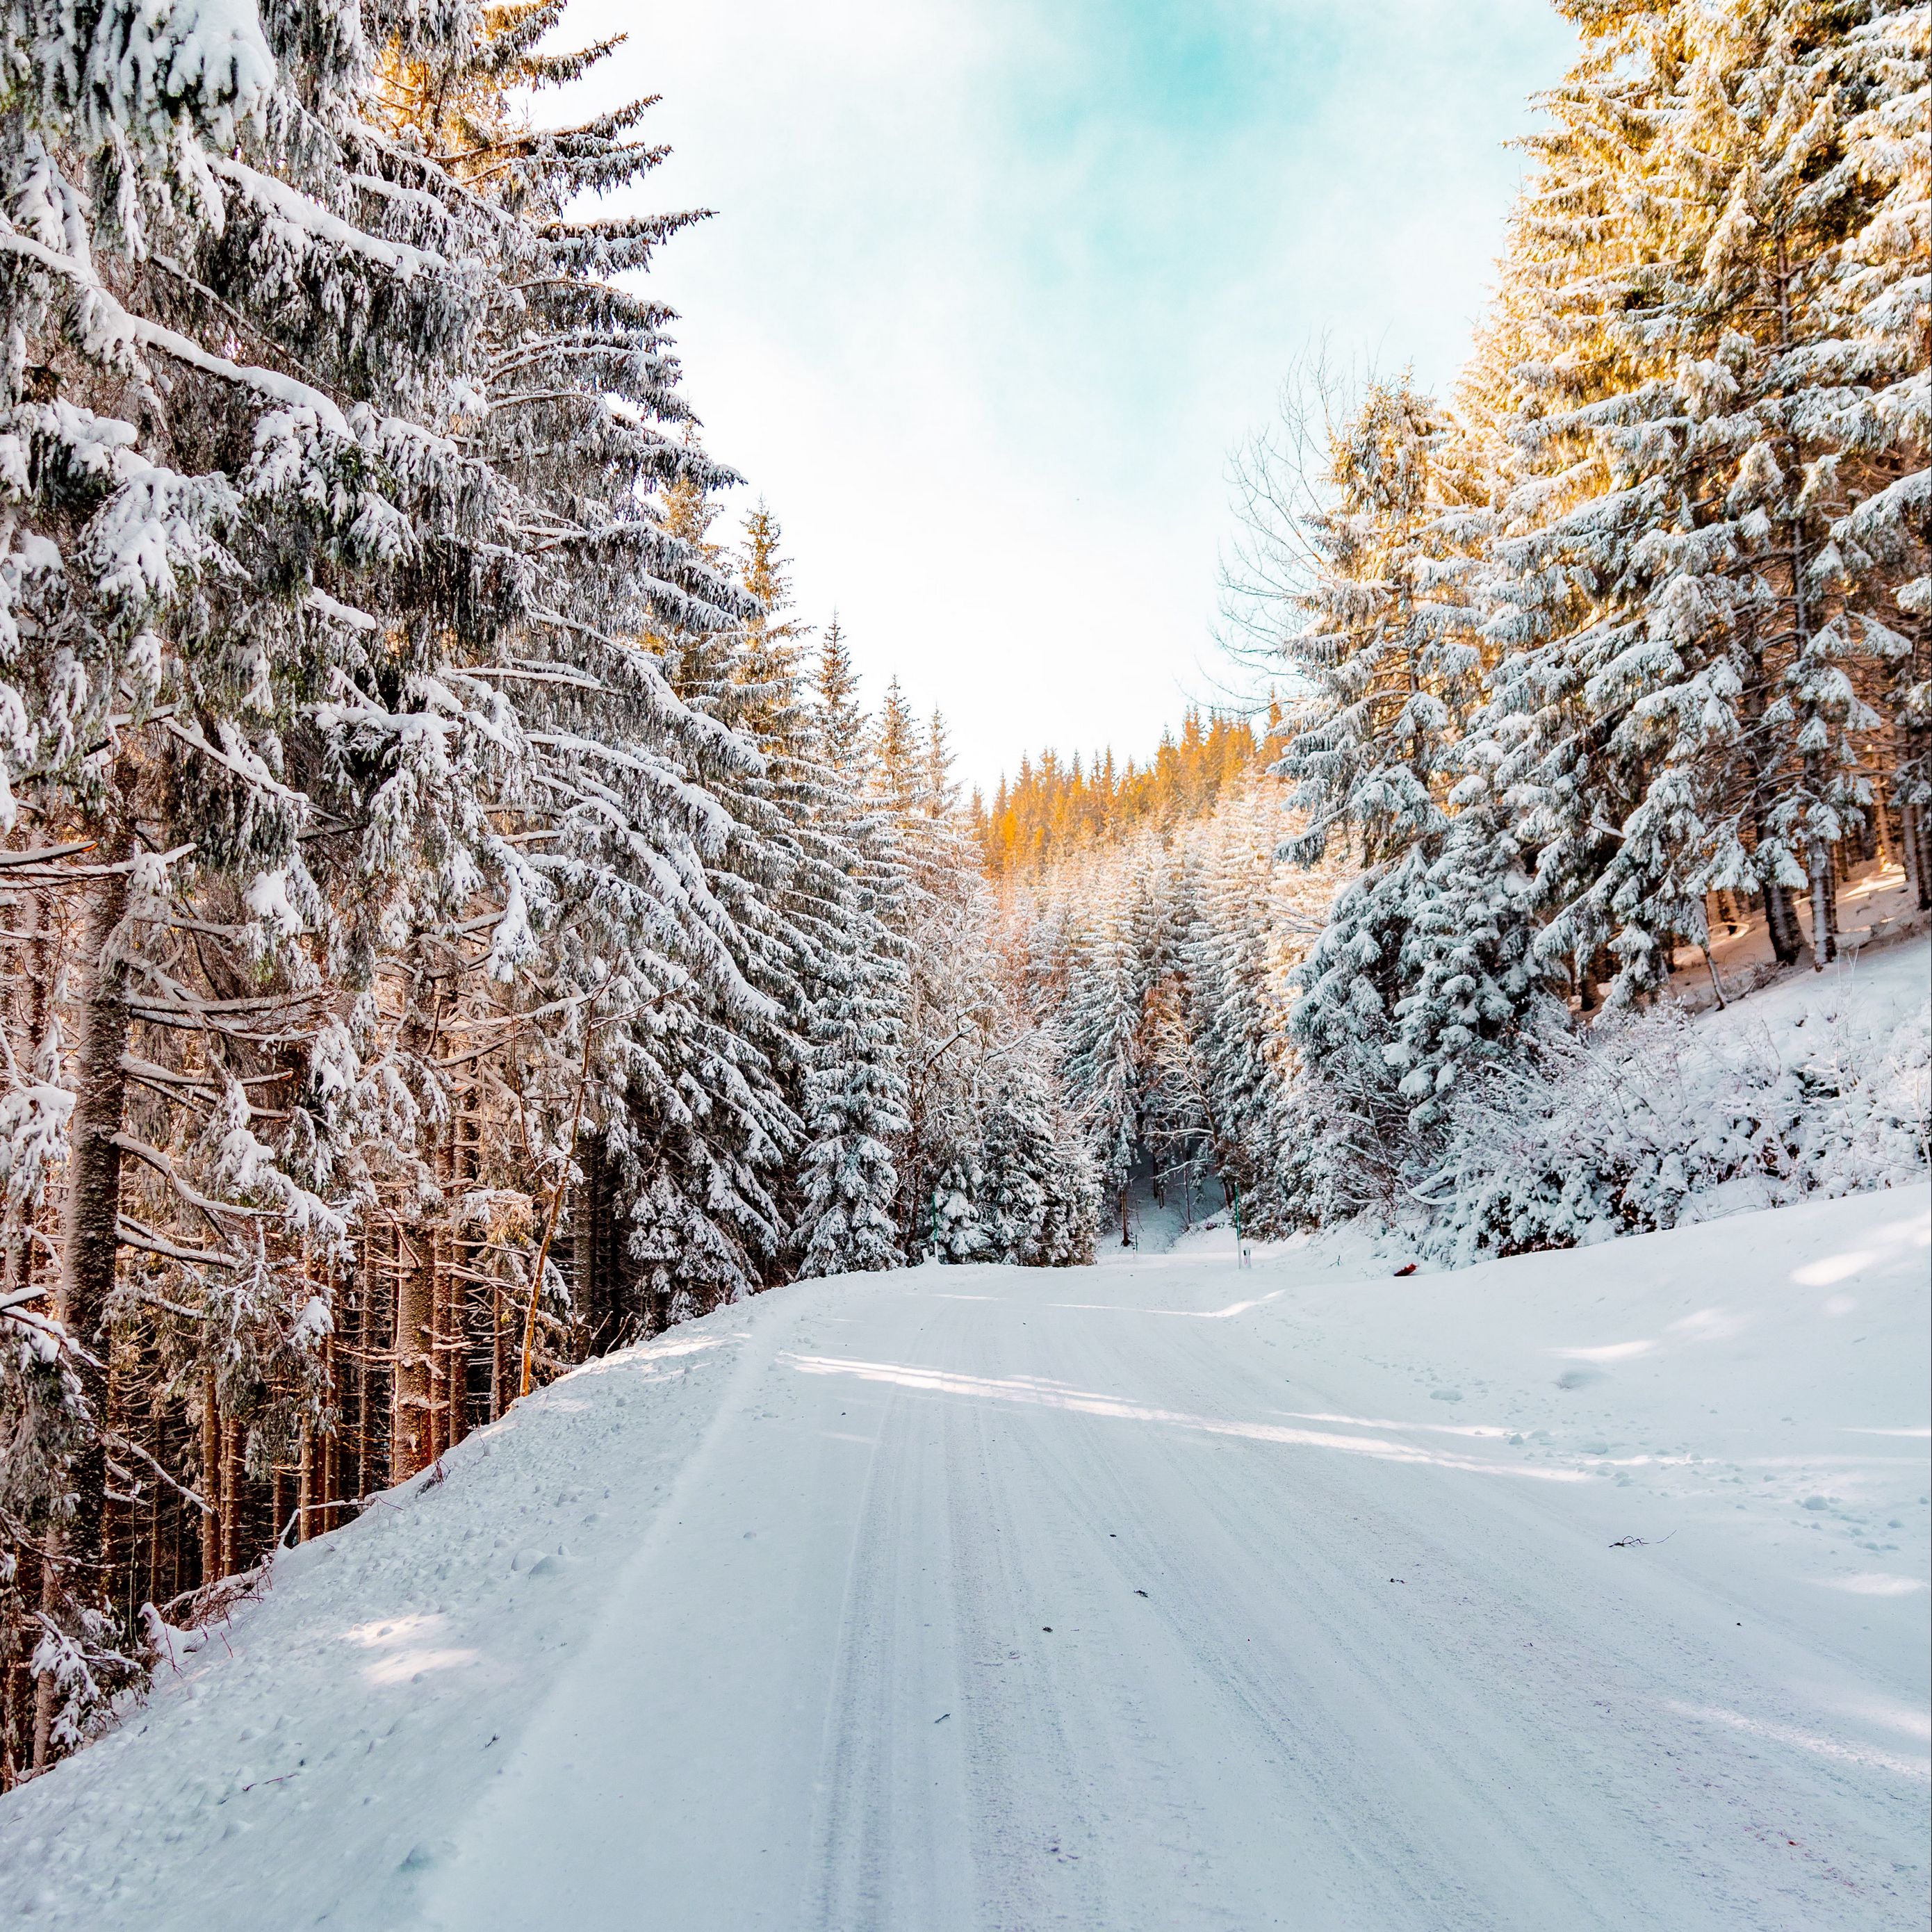 Download wallpaper 2780x2780 forest, winter, snow, road, sky, nature, winter landscape ipad air, ipad air ipad ipad ipad mini ipad mini ipad mini ipad pro 9.7 for parallax HD background